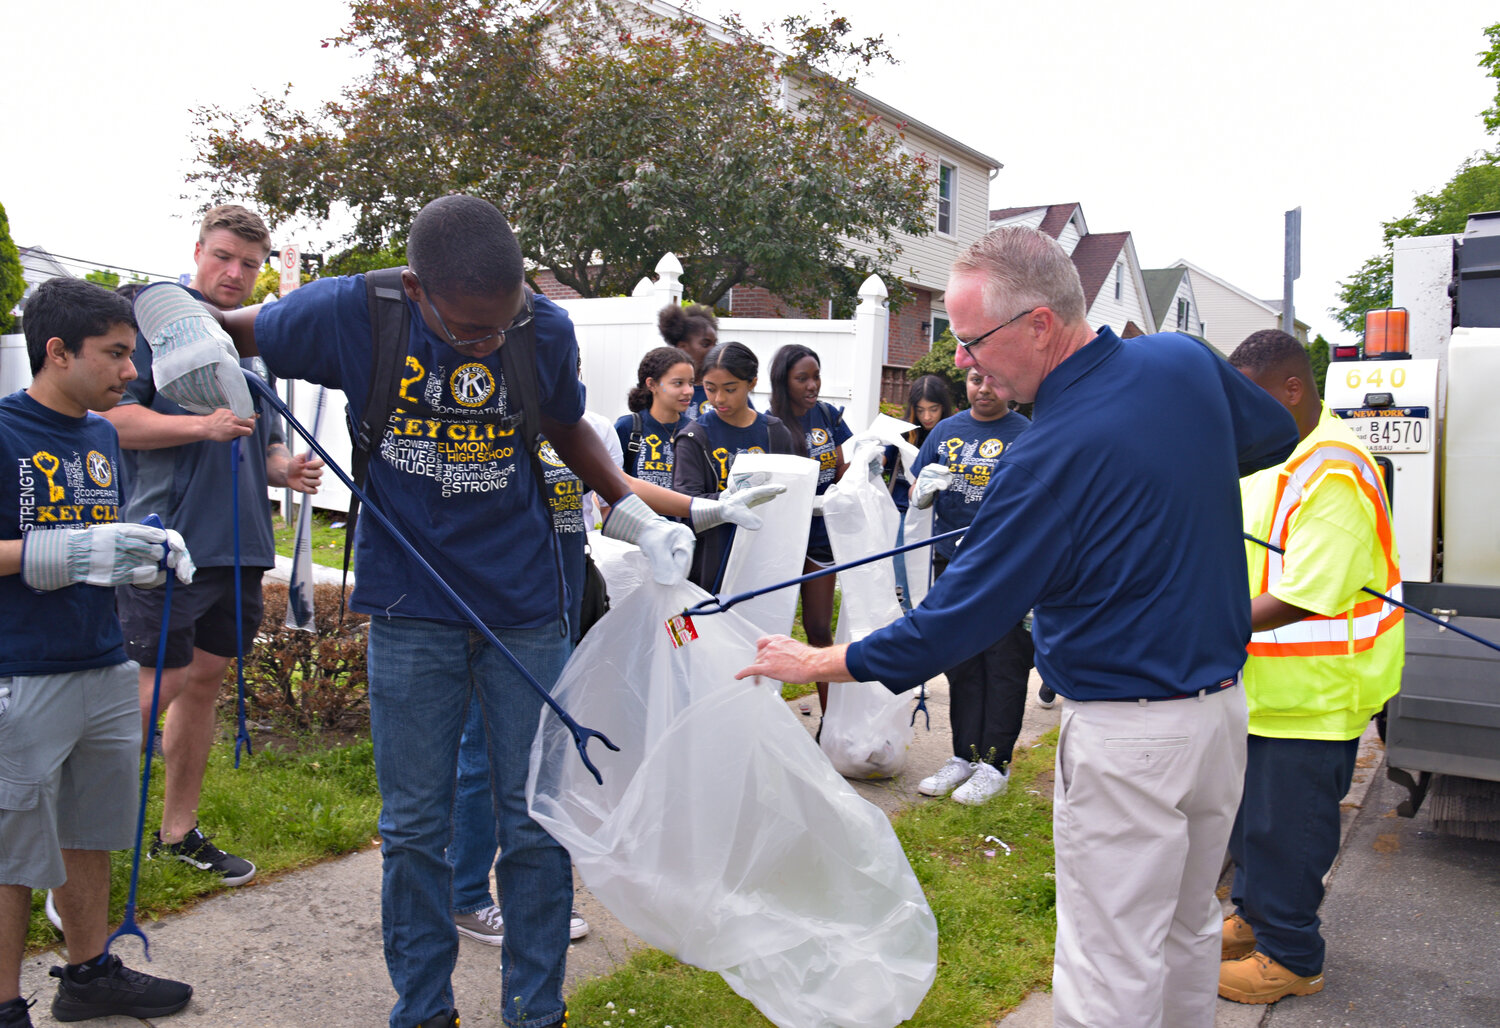 Hempstead Town Supervisor Don Clavin, right, gave Key Club students a hand in cleaning up the litter on the street.